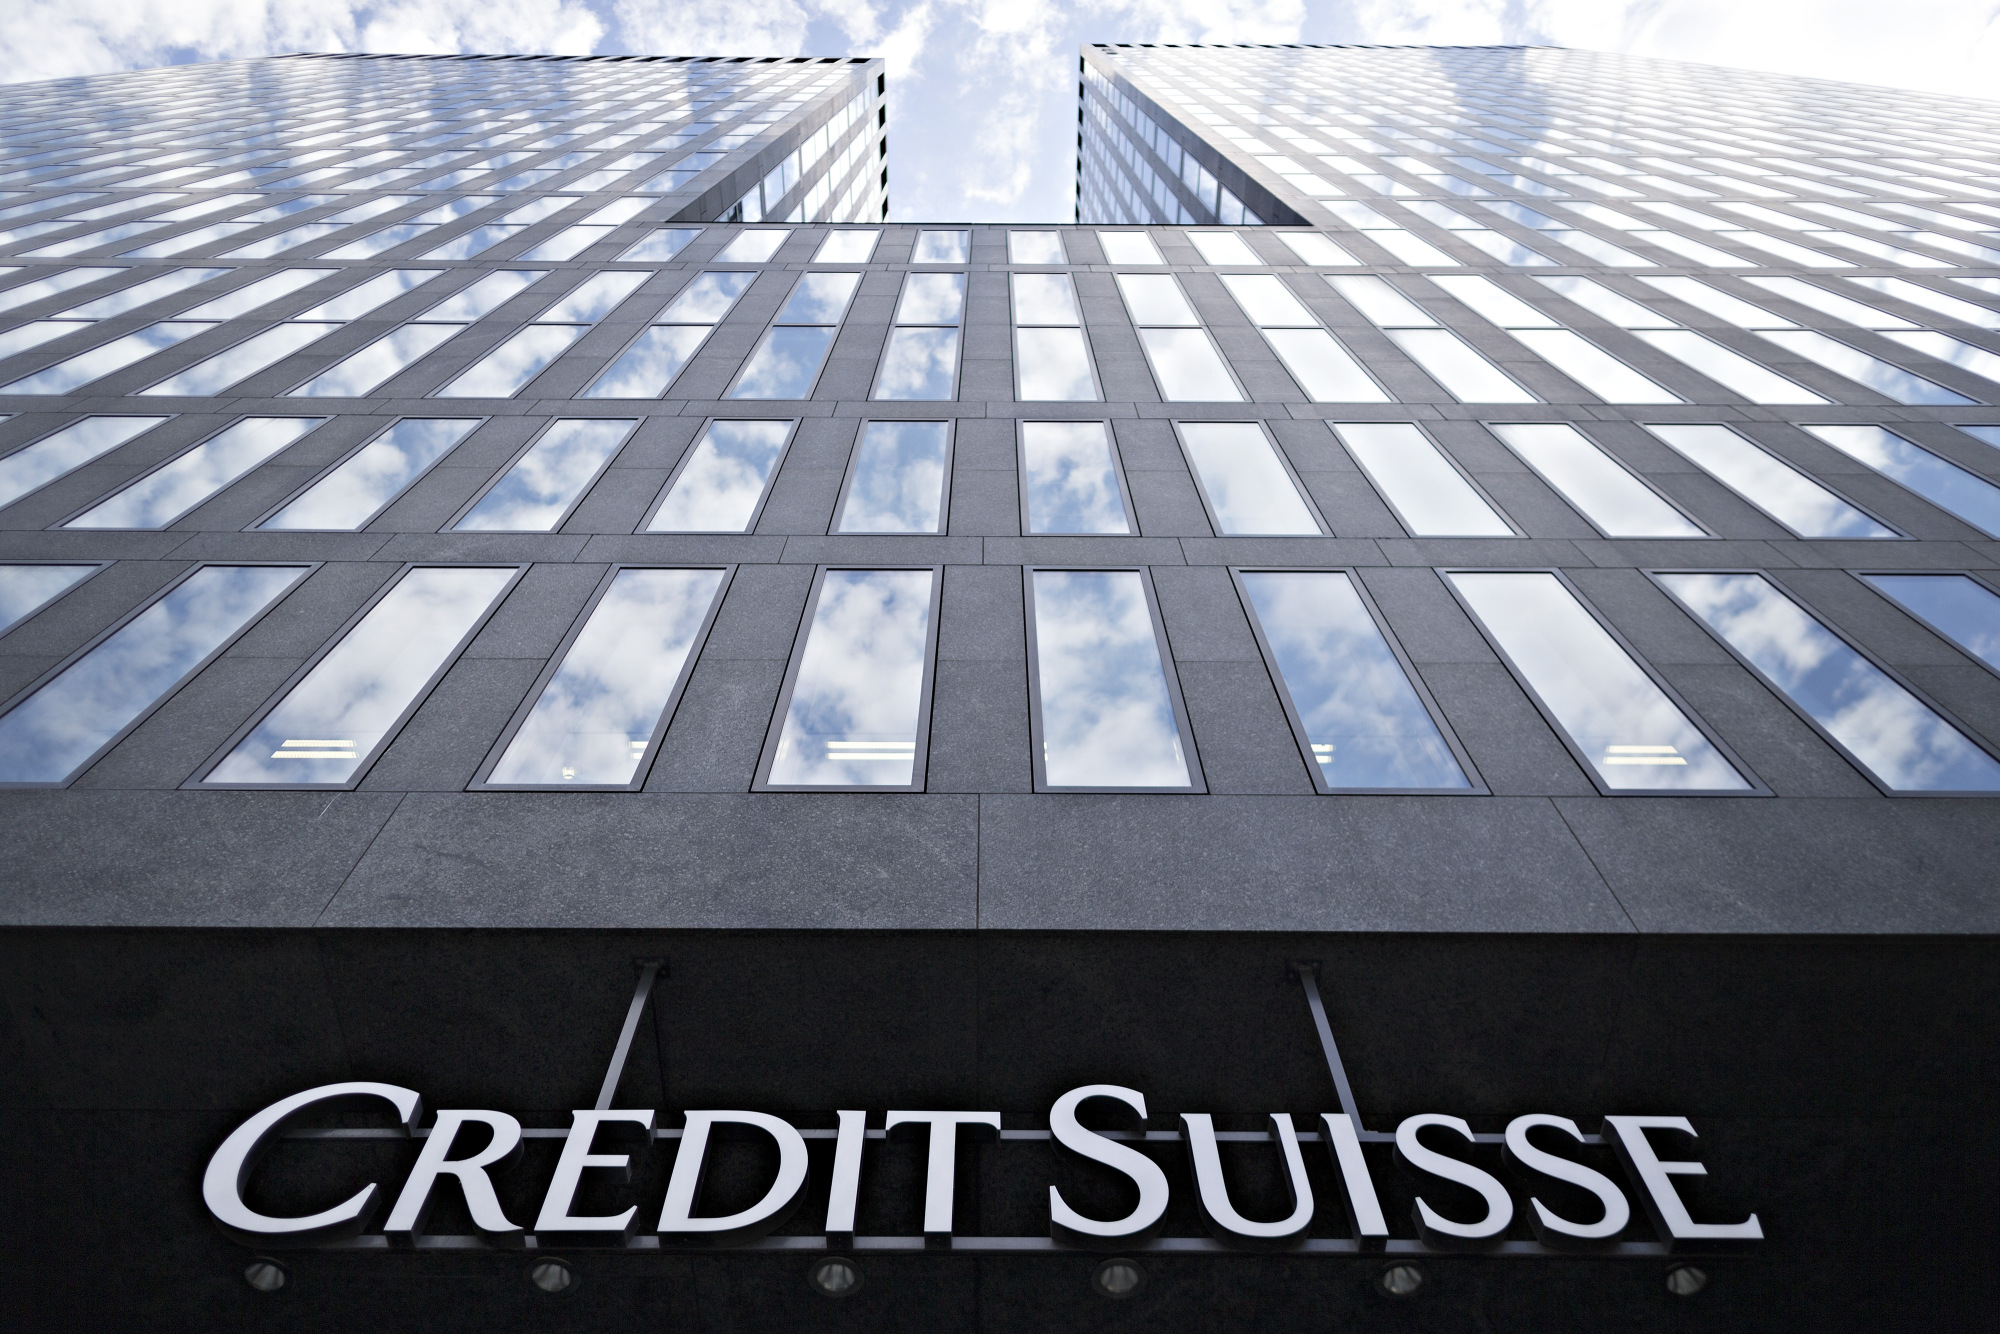 Swiss Banks As Government Seeks Tougher Capital Rules for Domestic Banks